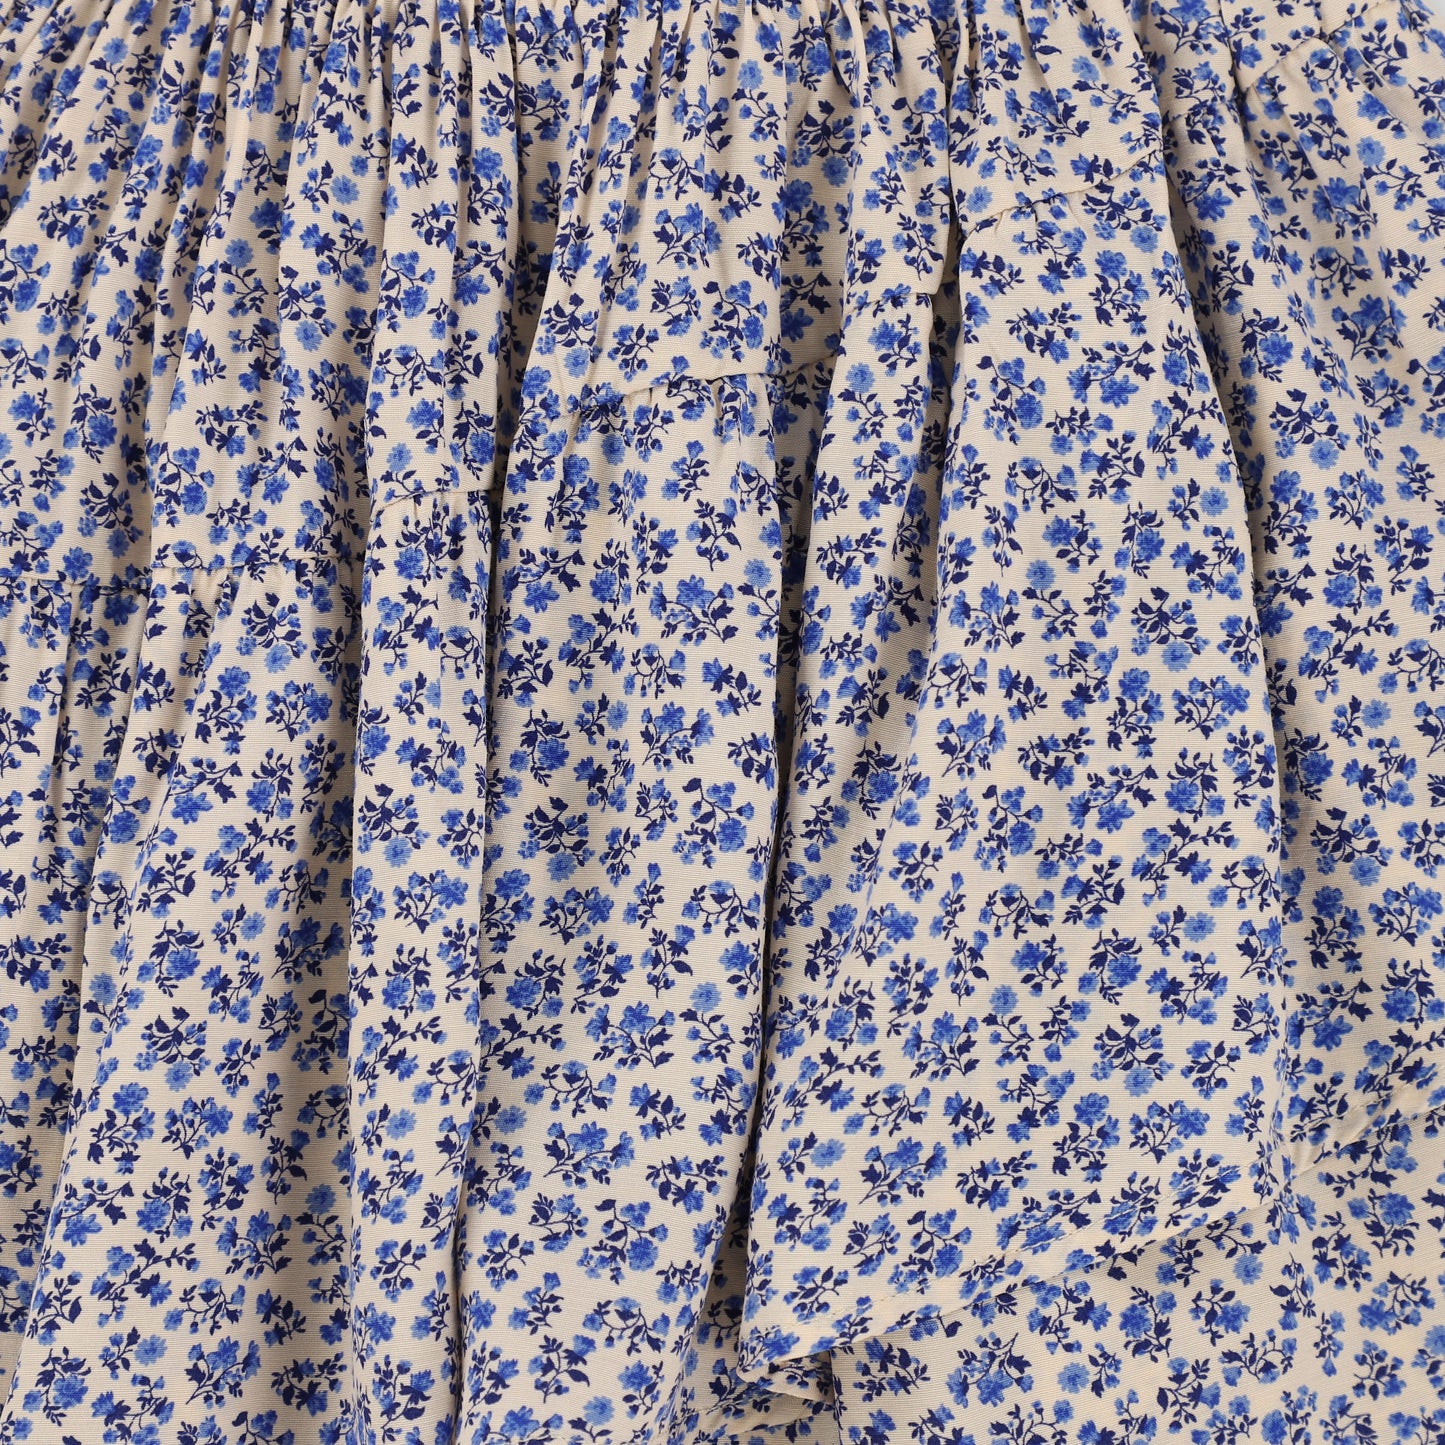 REPOSE BLUE FLORAL ALL OVER PRINT RUFFLE SKIRT [Final Sale]